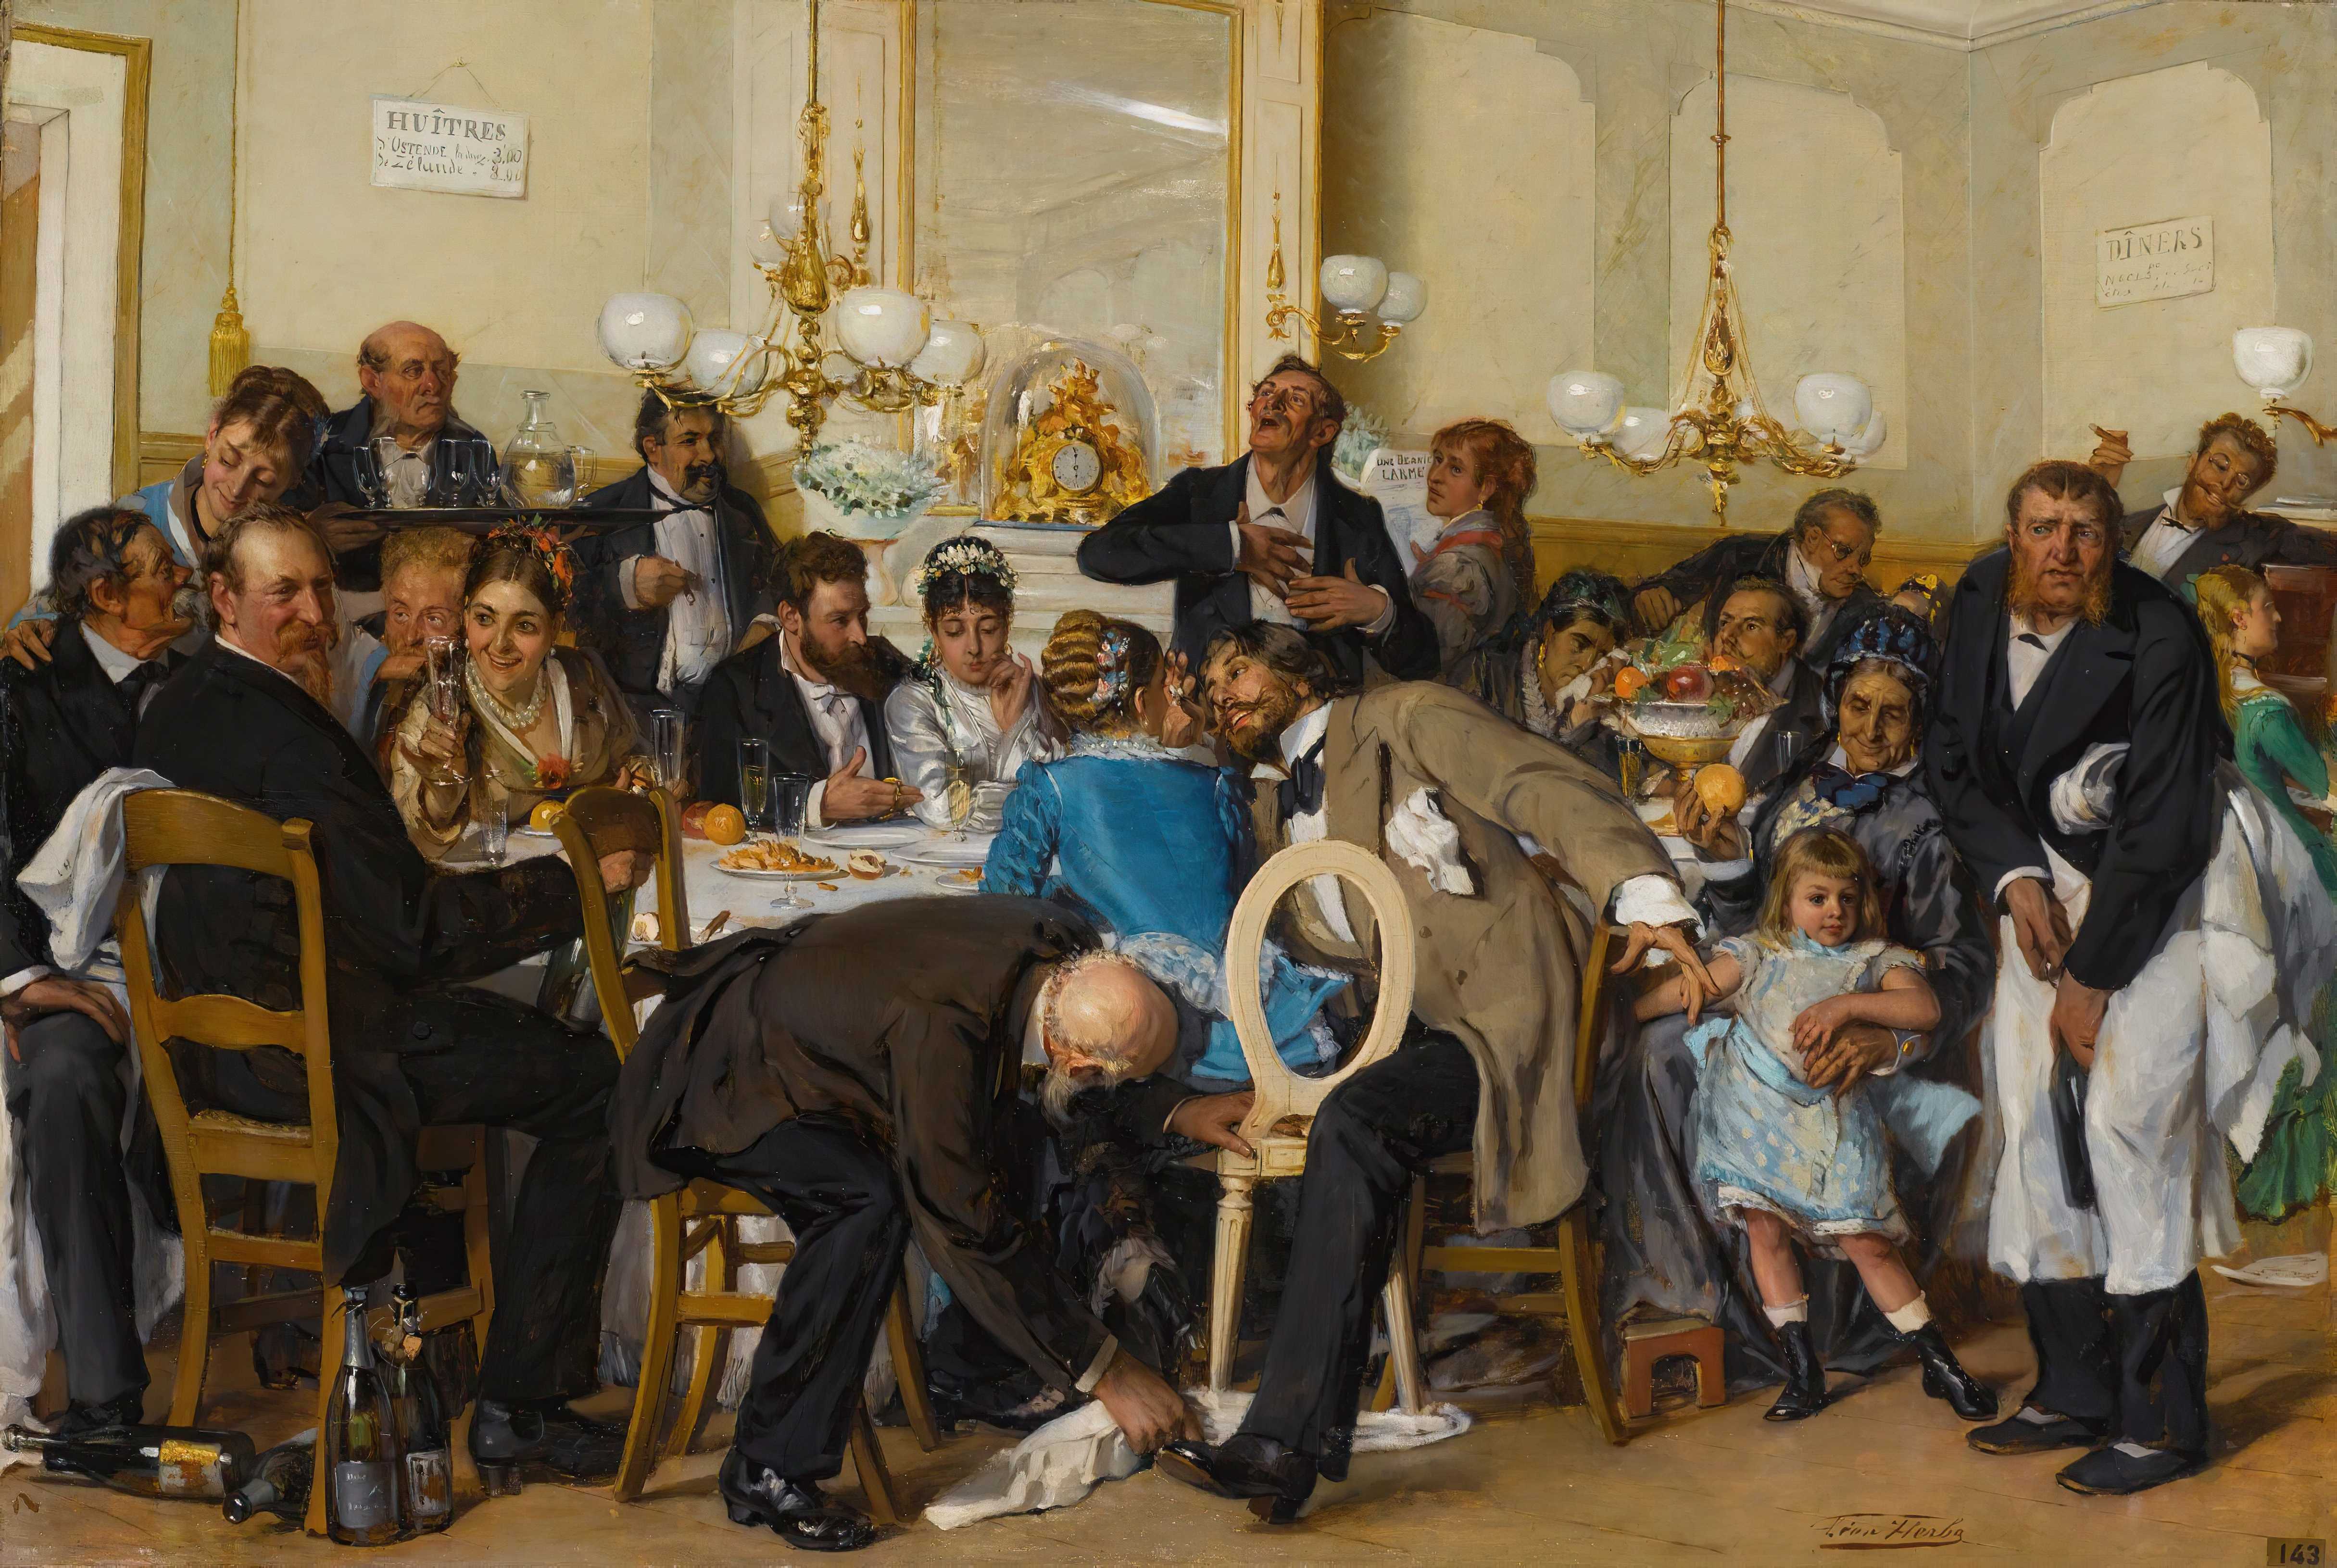 Find out more about Léon Herbo - The wedding feast